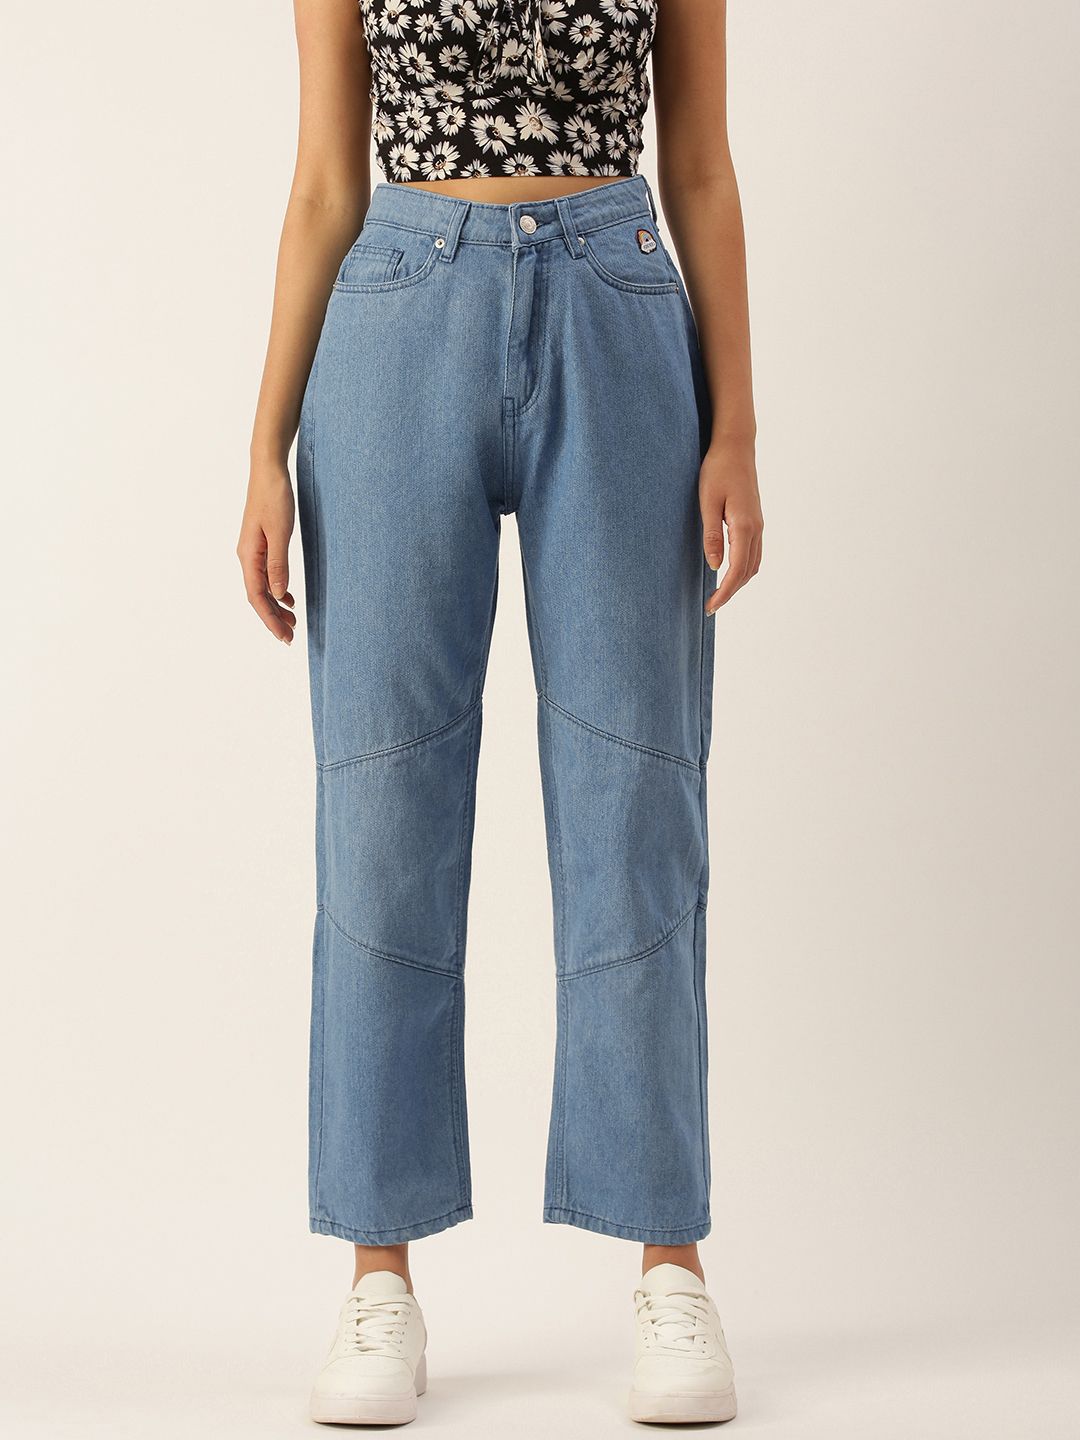 FOREVER 21 Women Denim Solid Stretchable Casual Jeans Price in India